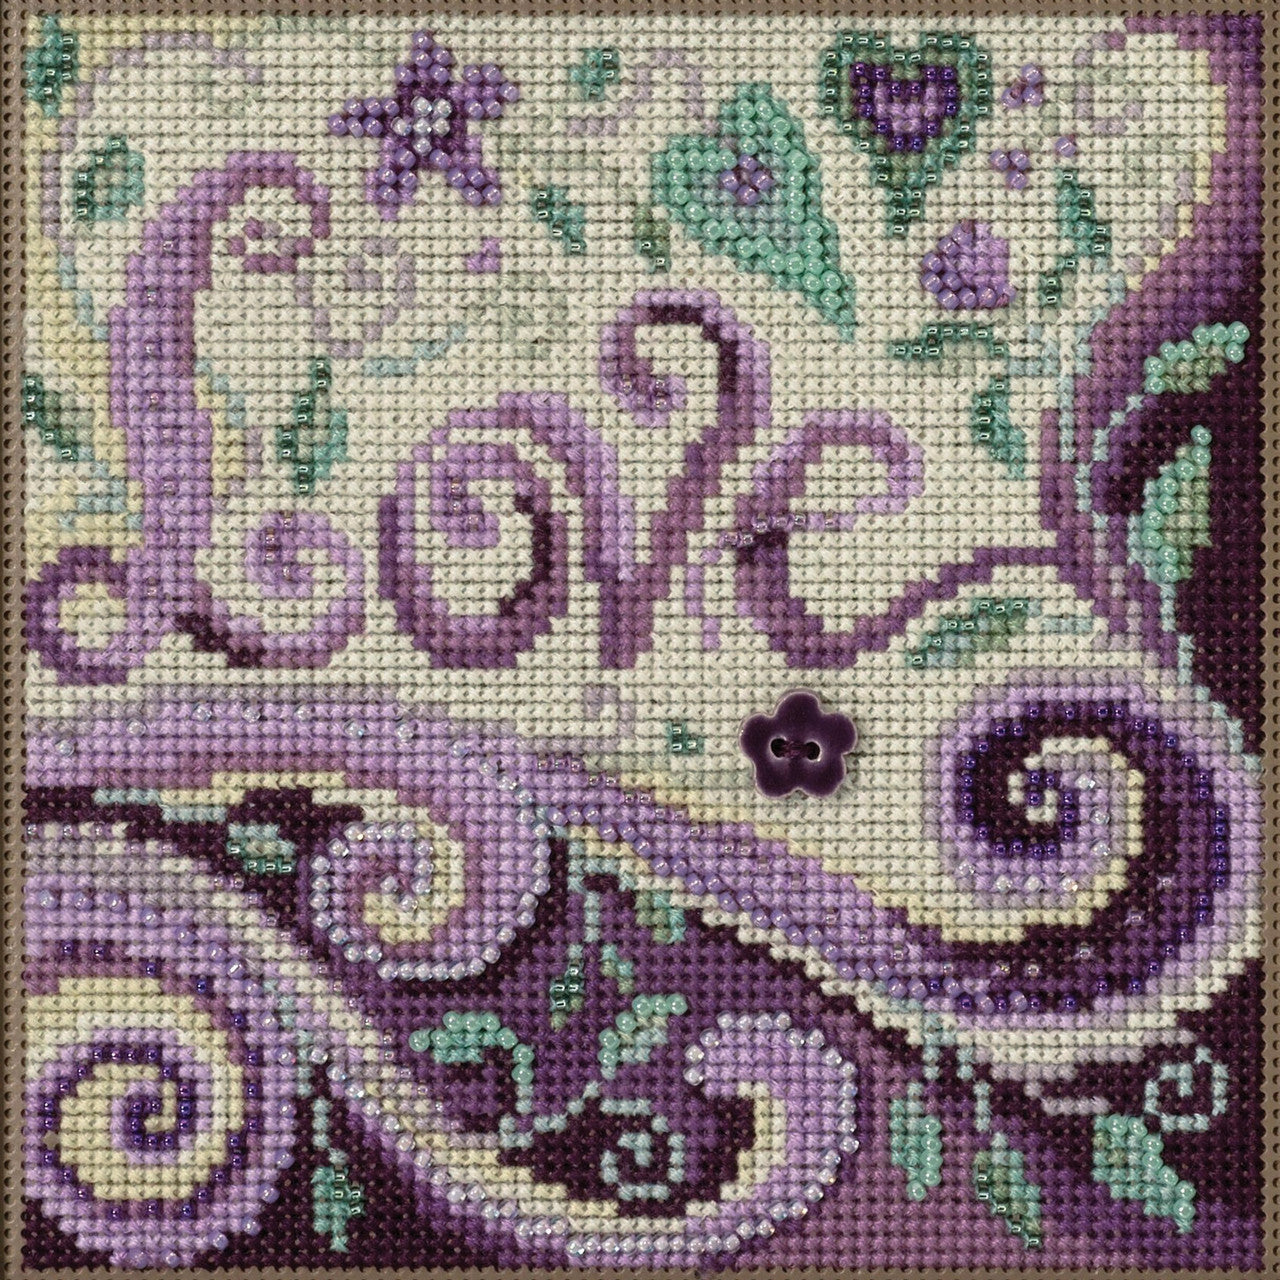 Buttons & Beads - Love counted cross stitch kit